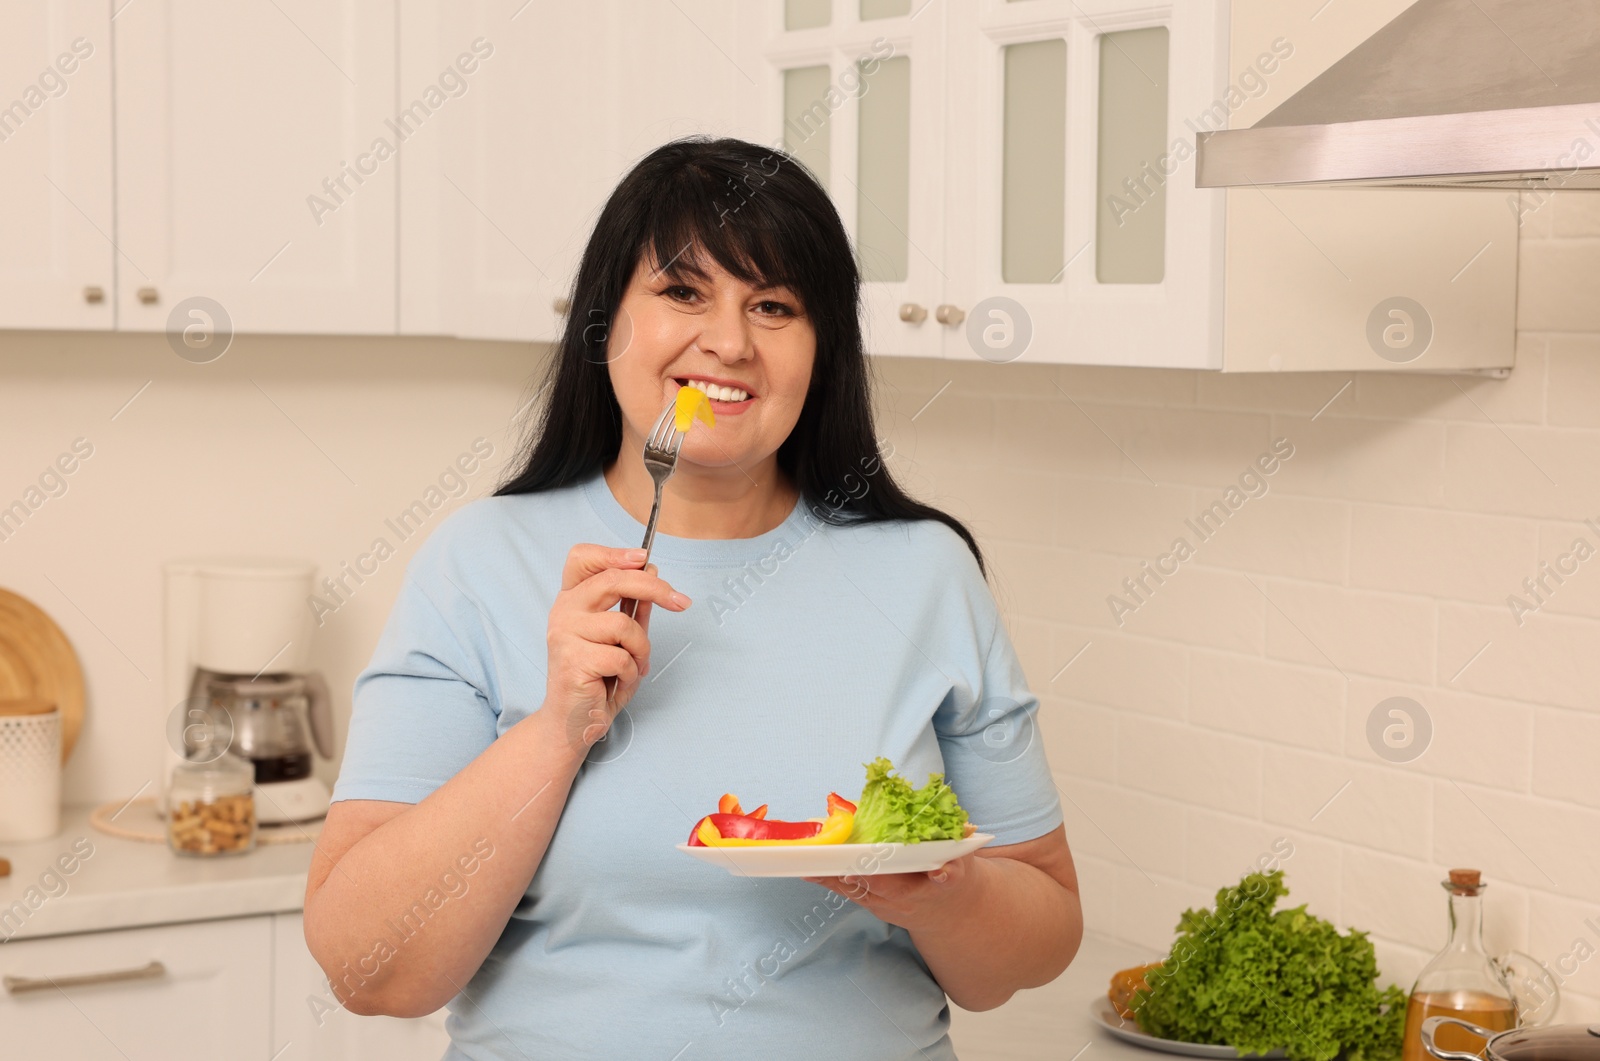 Photo of Happy overweight woman eating salad in kitchen. Healthy diet